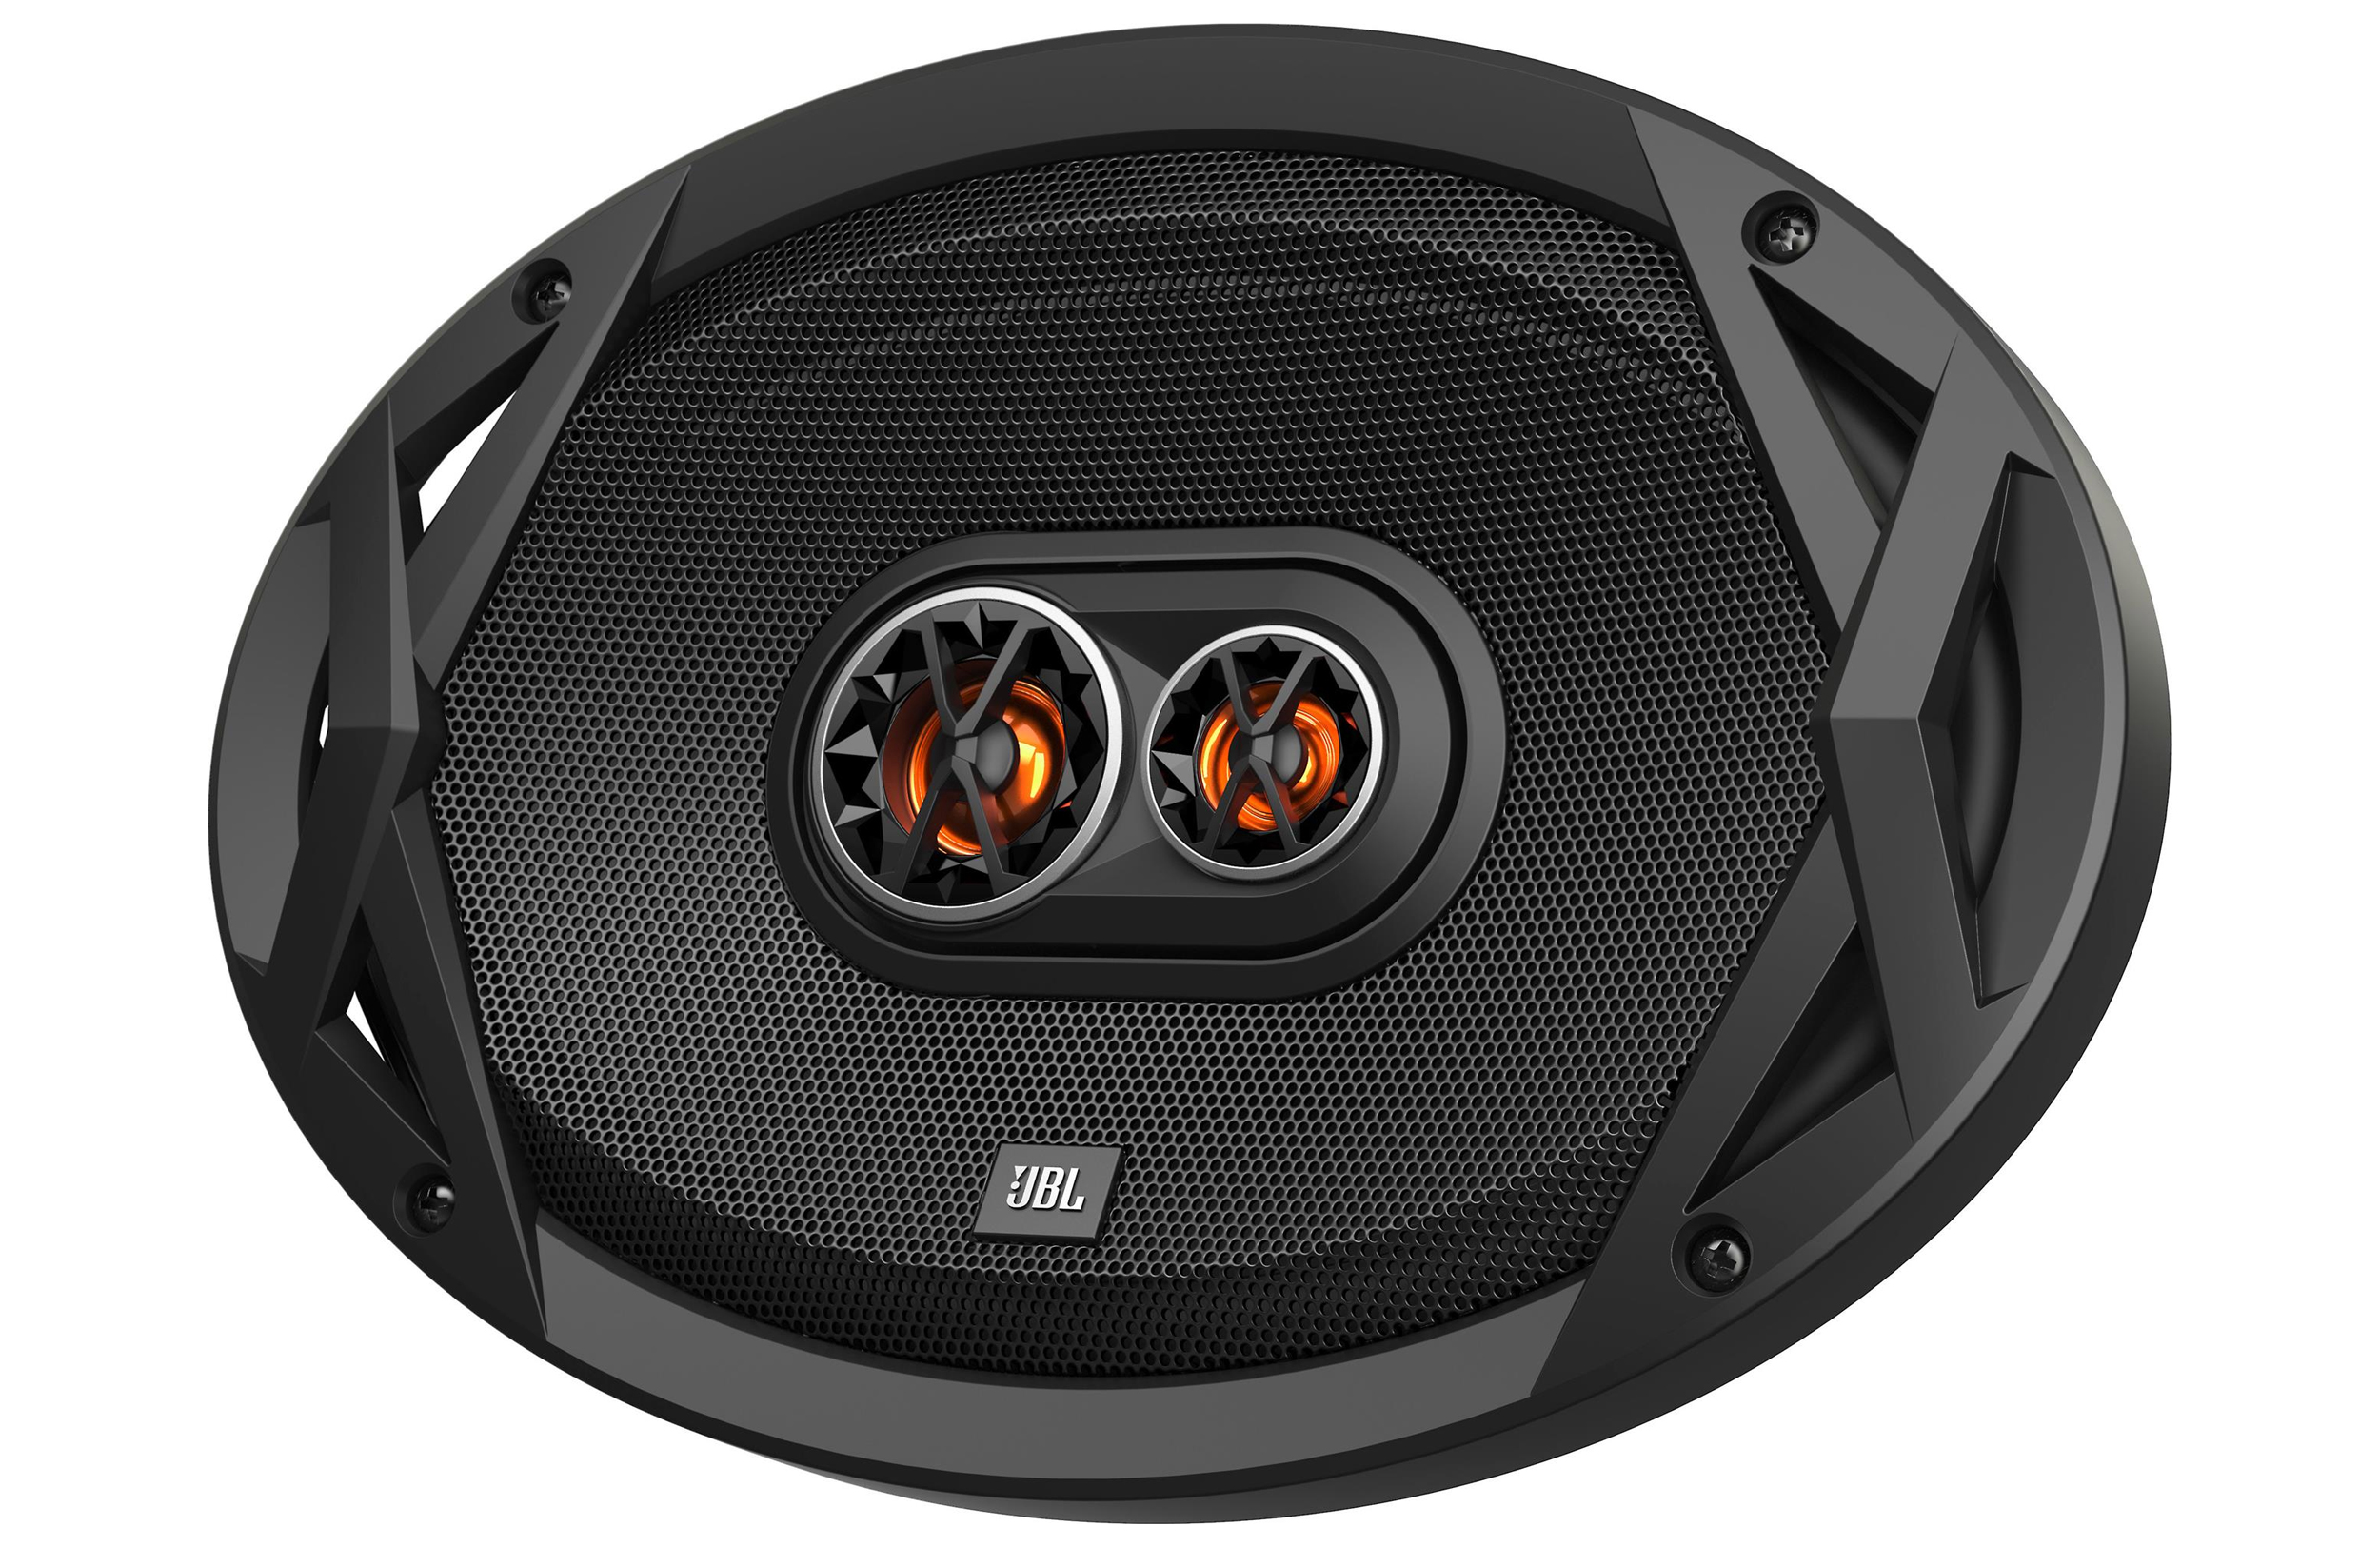 JBL CLUB 9630 Every Club speaker’s woofer cone is designed to deliver clean, non-resonant sound quality, while standing up to the demanding heat and humidity of the car environment.